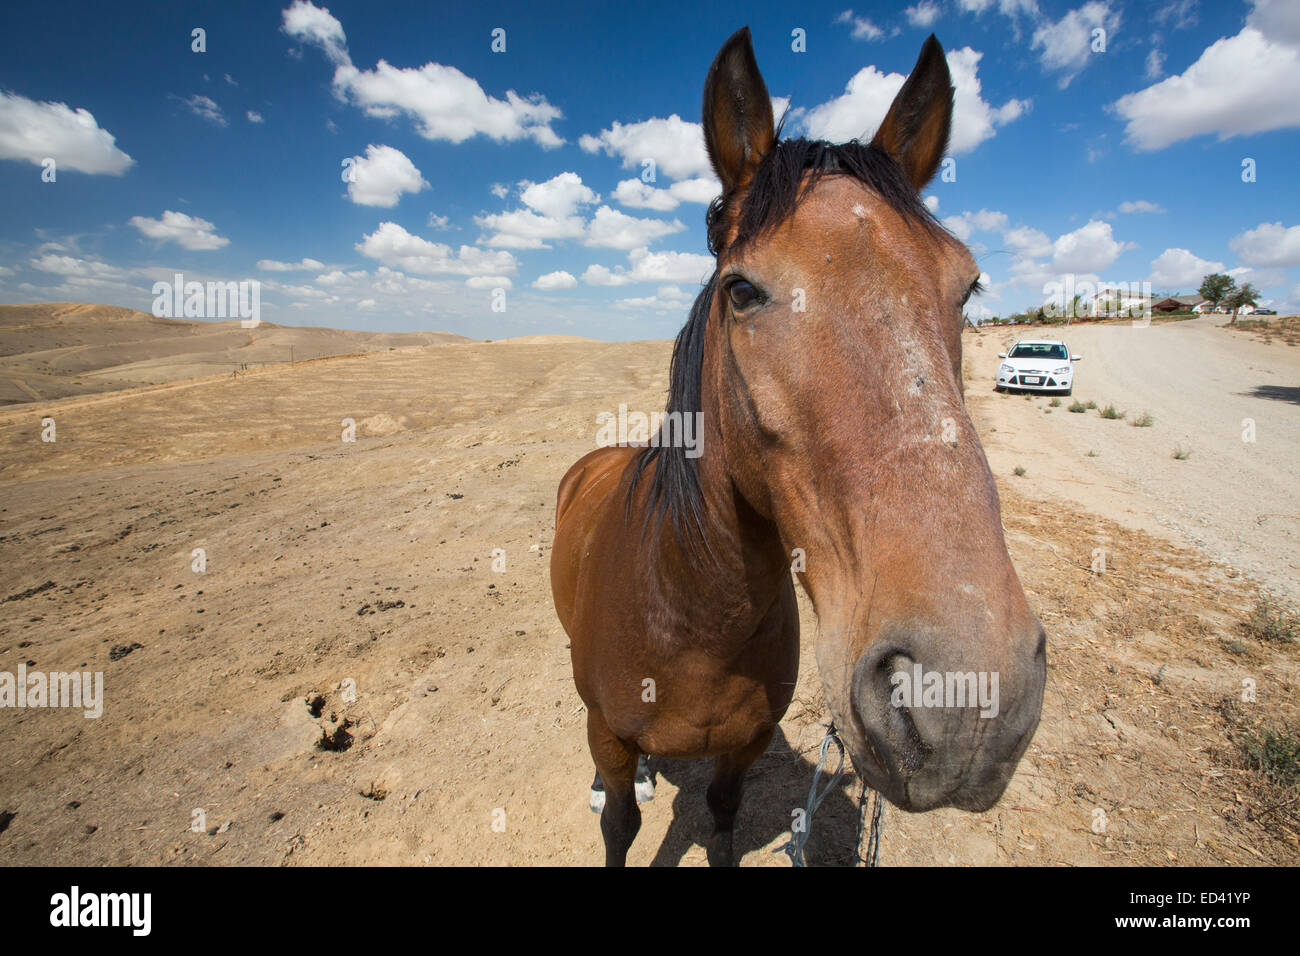 A horse in a drought parched landscape in Bakersfield, California, USA. following the four year long drought, Bakersfield is now the driest city in the USA. Stock Photo